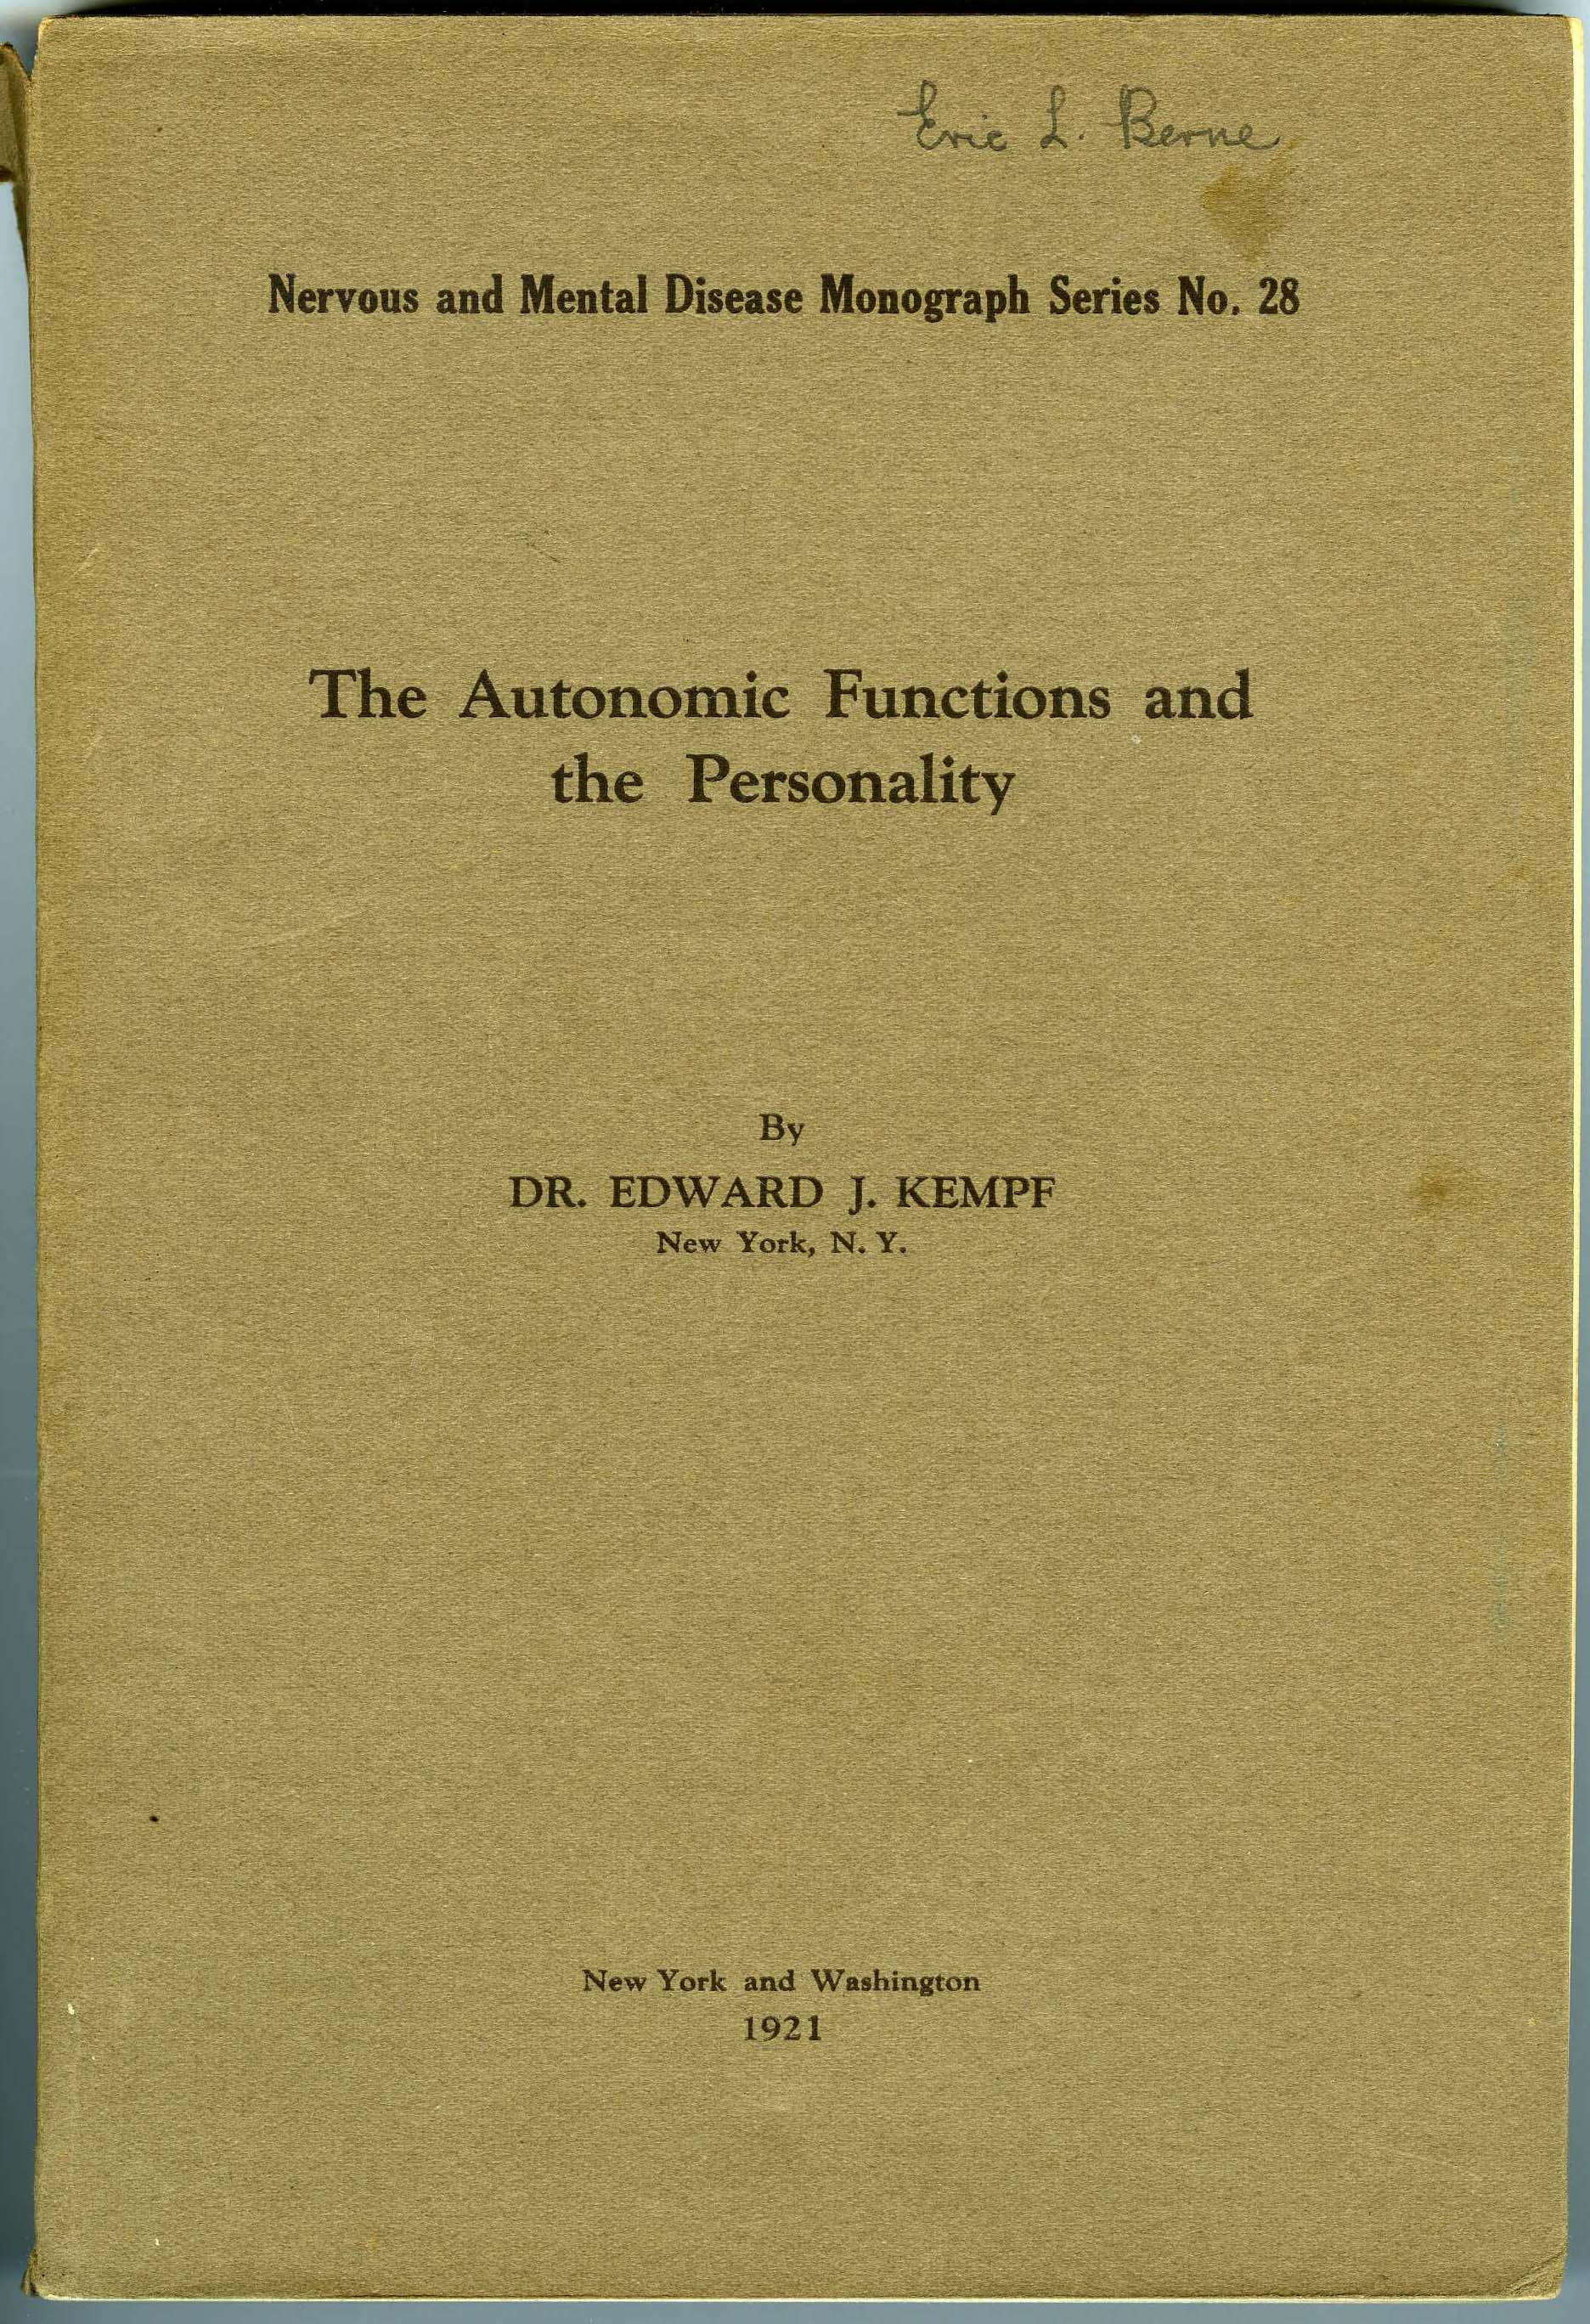 Cover of Berne's medical school textbook "The Autonomic Functions and the Personality" by Dr. Edward J. Kempf, 1921 